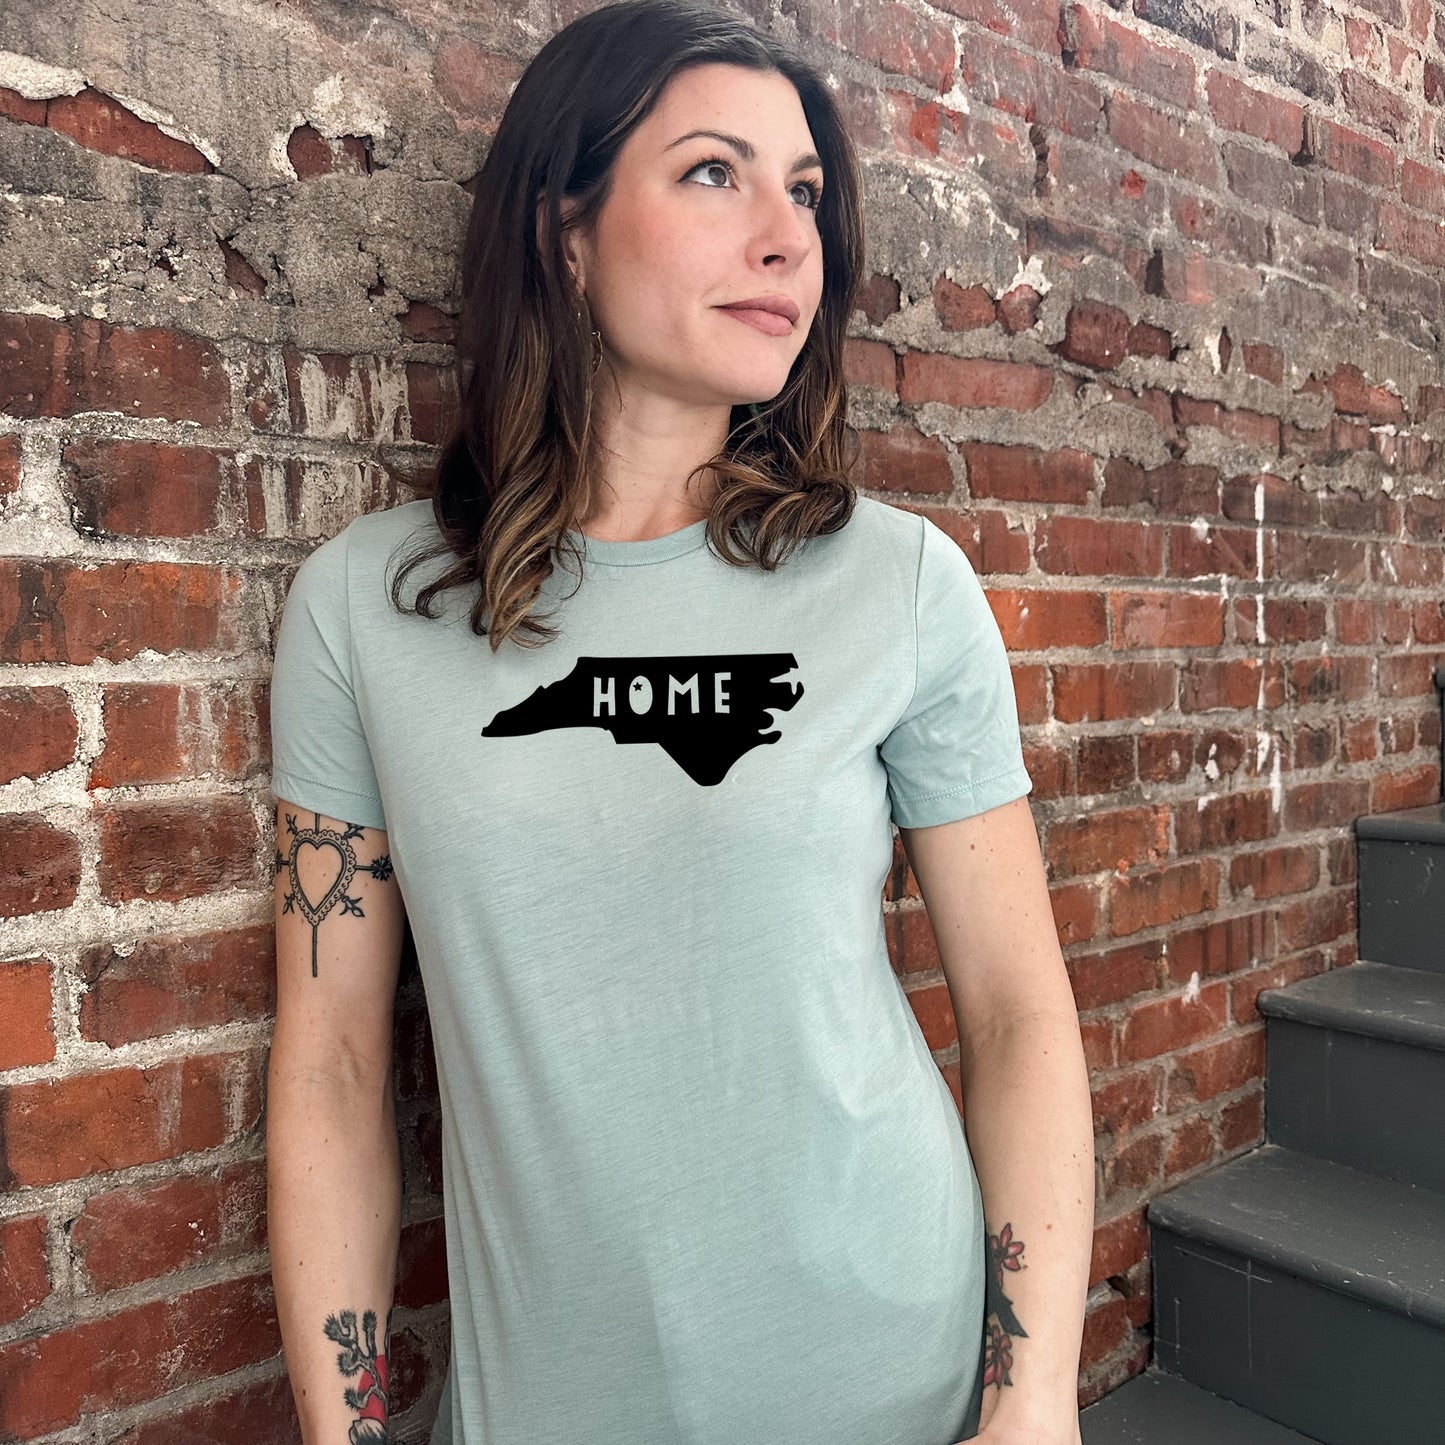 Home (North Carolina) - Women's Crew Tee - Olive or Dusty Blue